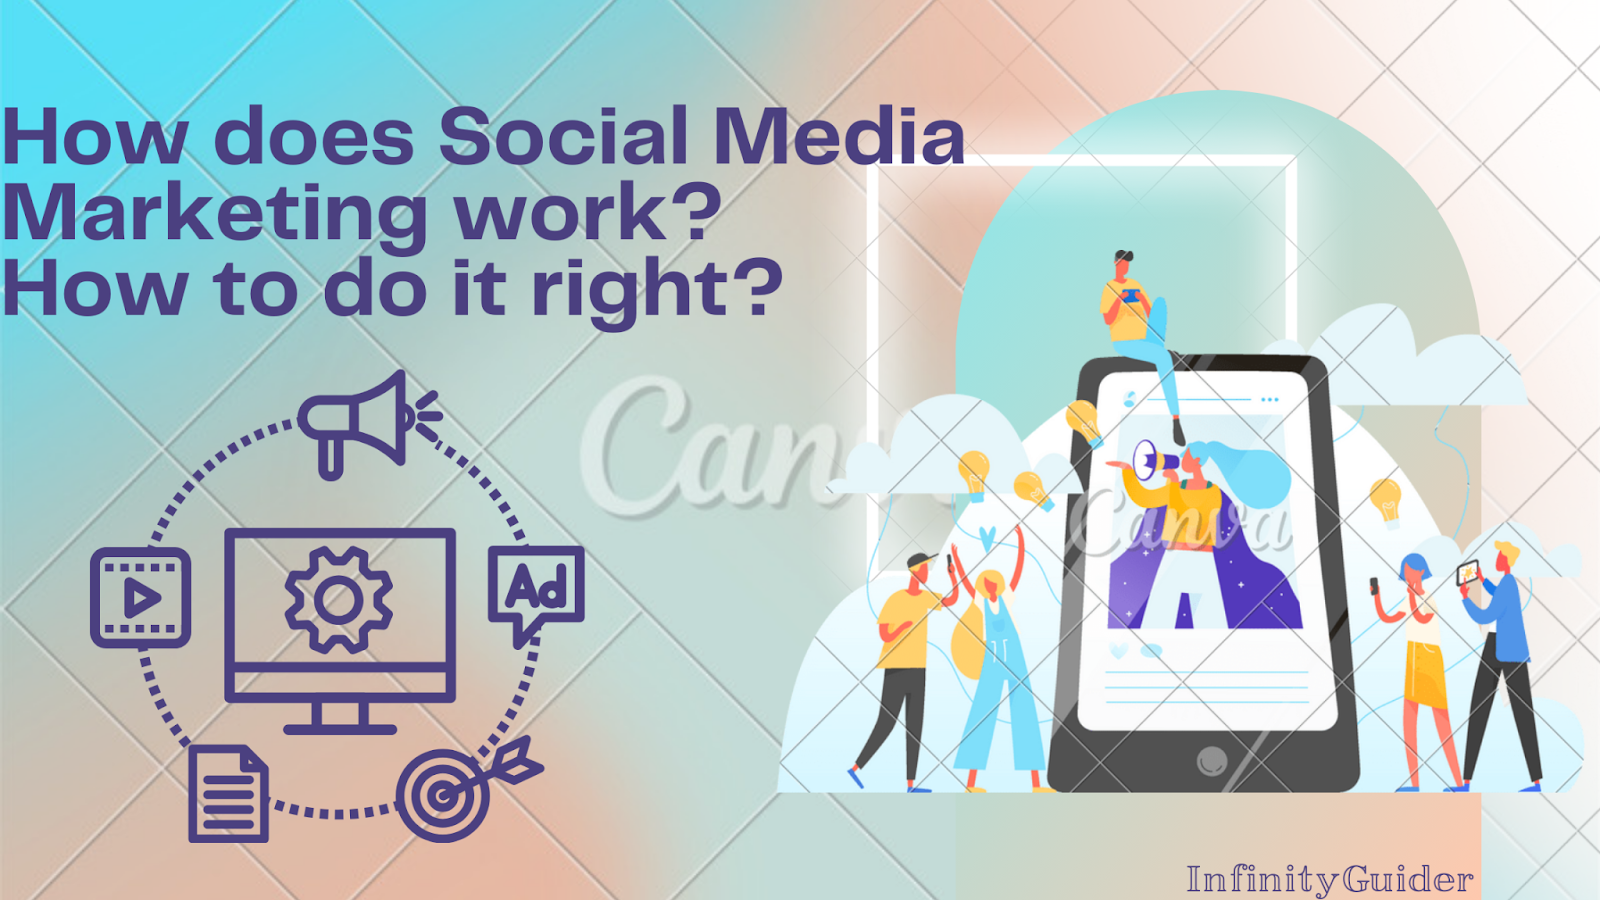 How does Social Media Marketing work and how to do it right